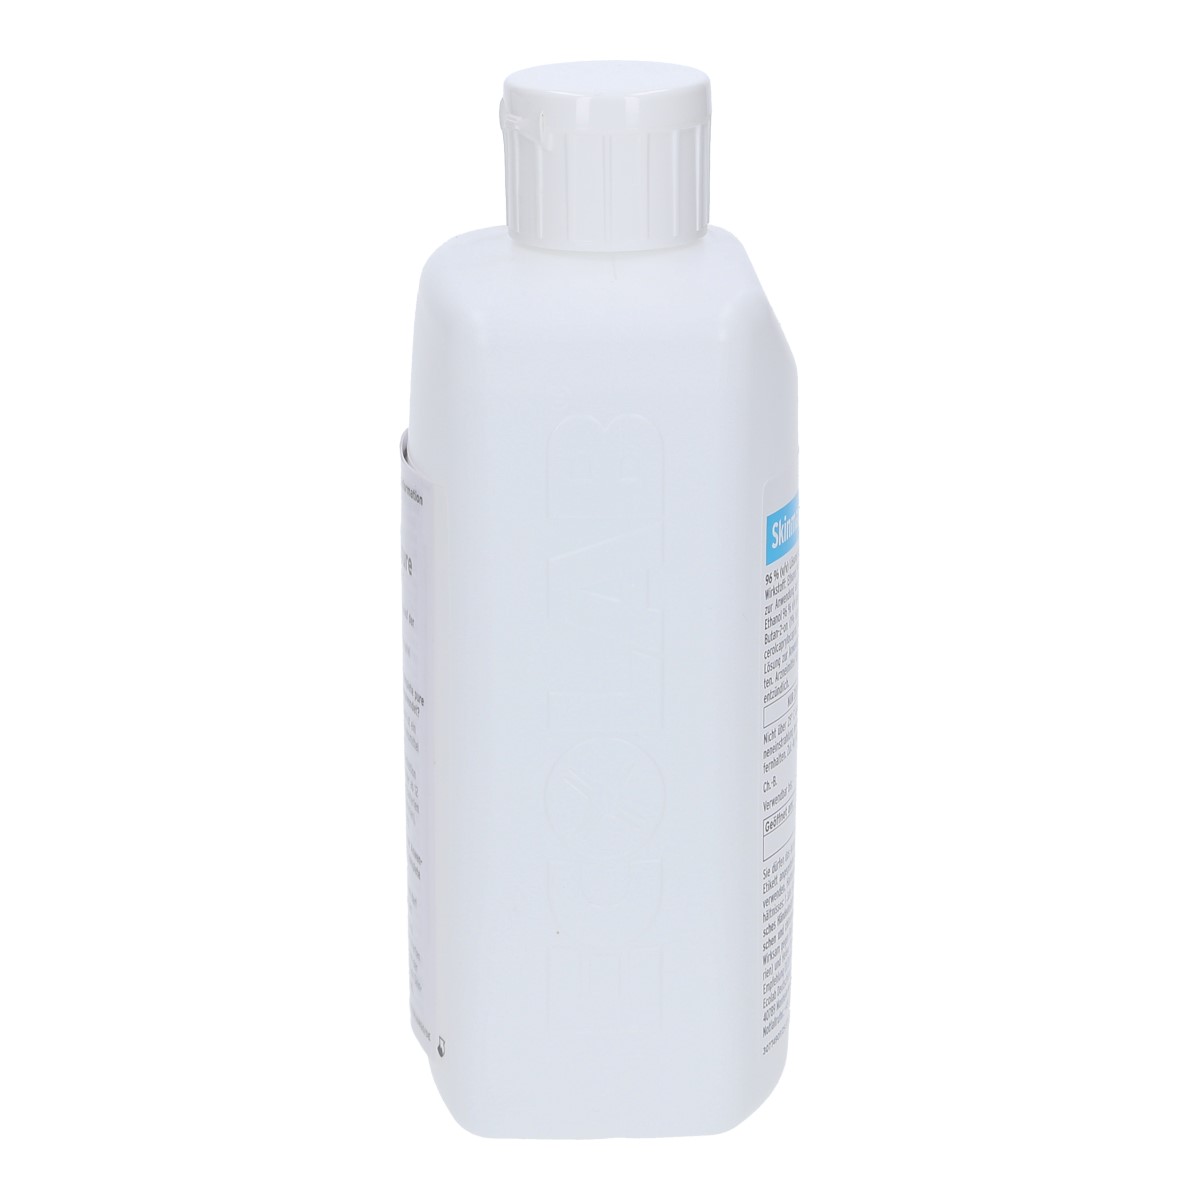 Ecolab Skinman complete pure 500ml